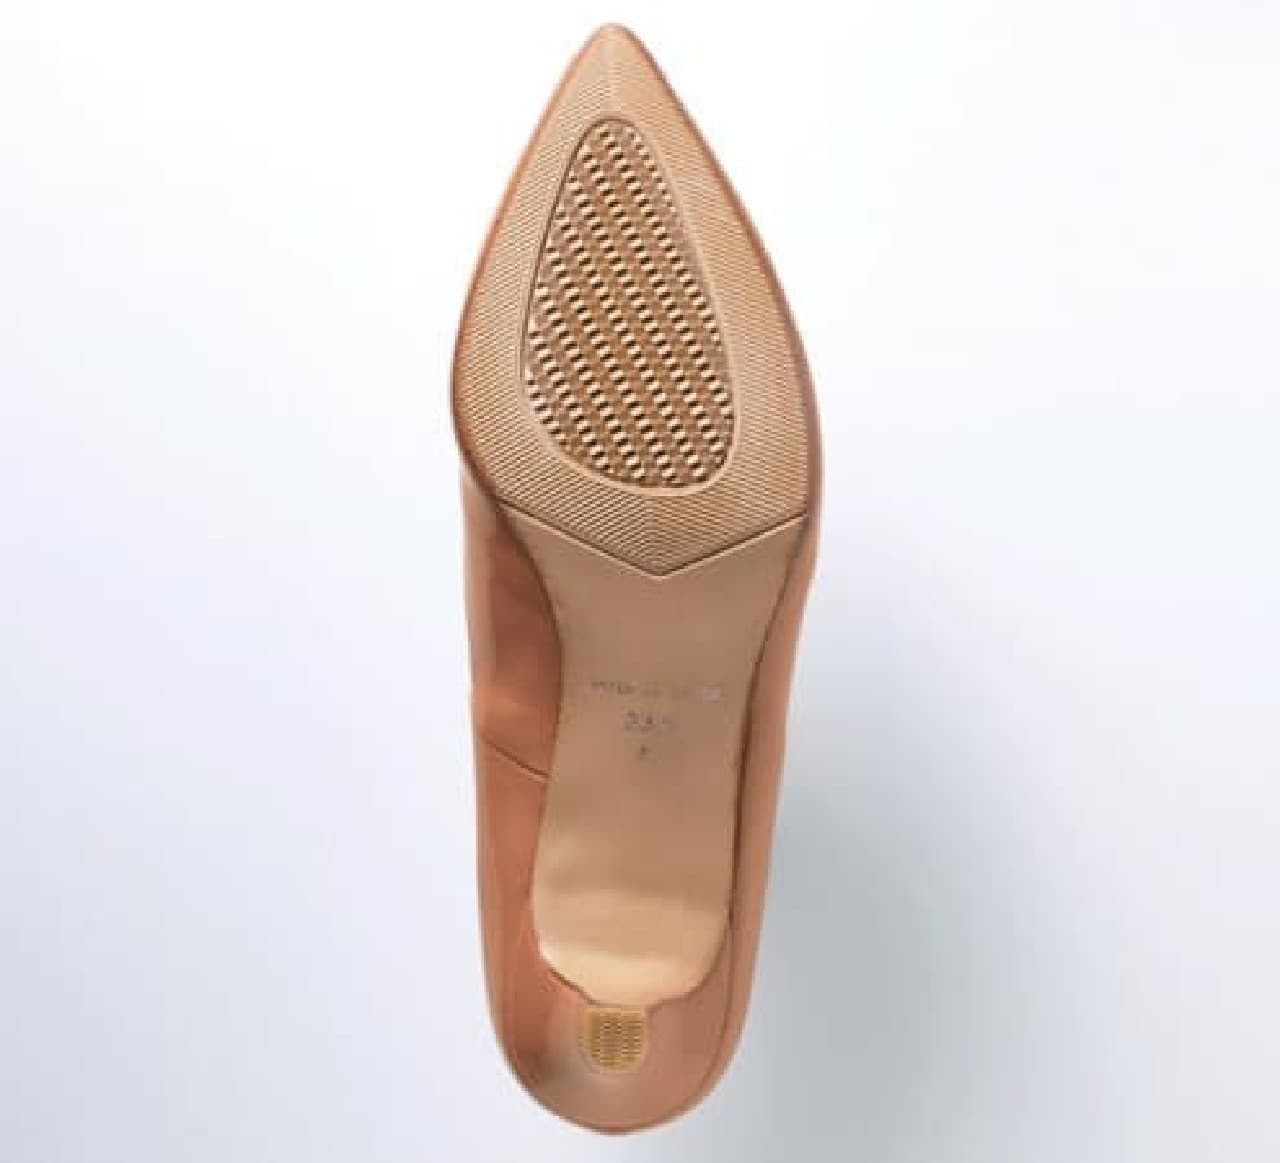 Belle Maison "Beautiful pumps that can withstand the rain"